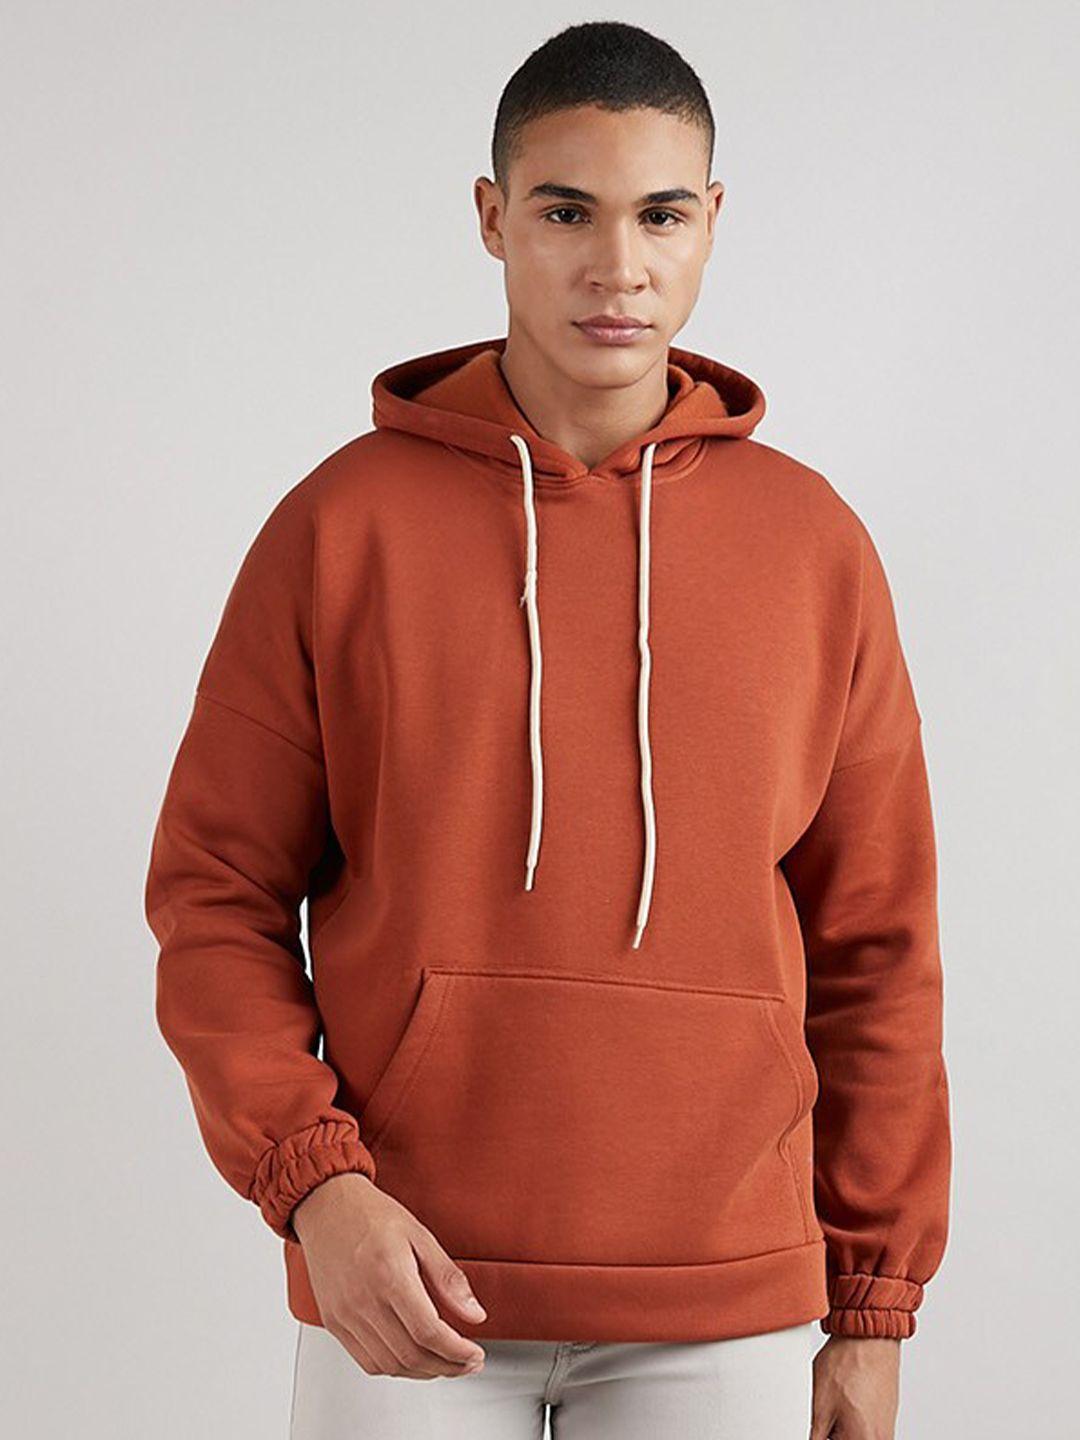 campus-sutra-hooded-cotton-pullover-sweatshirt